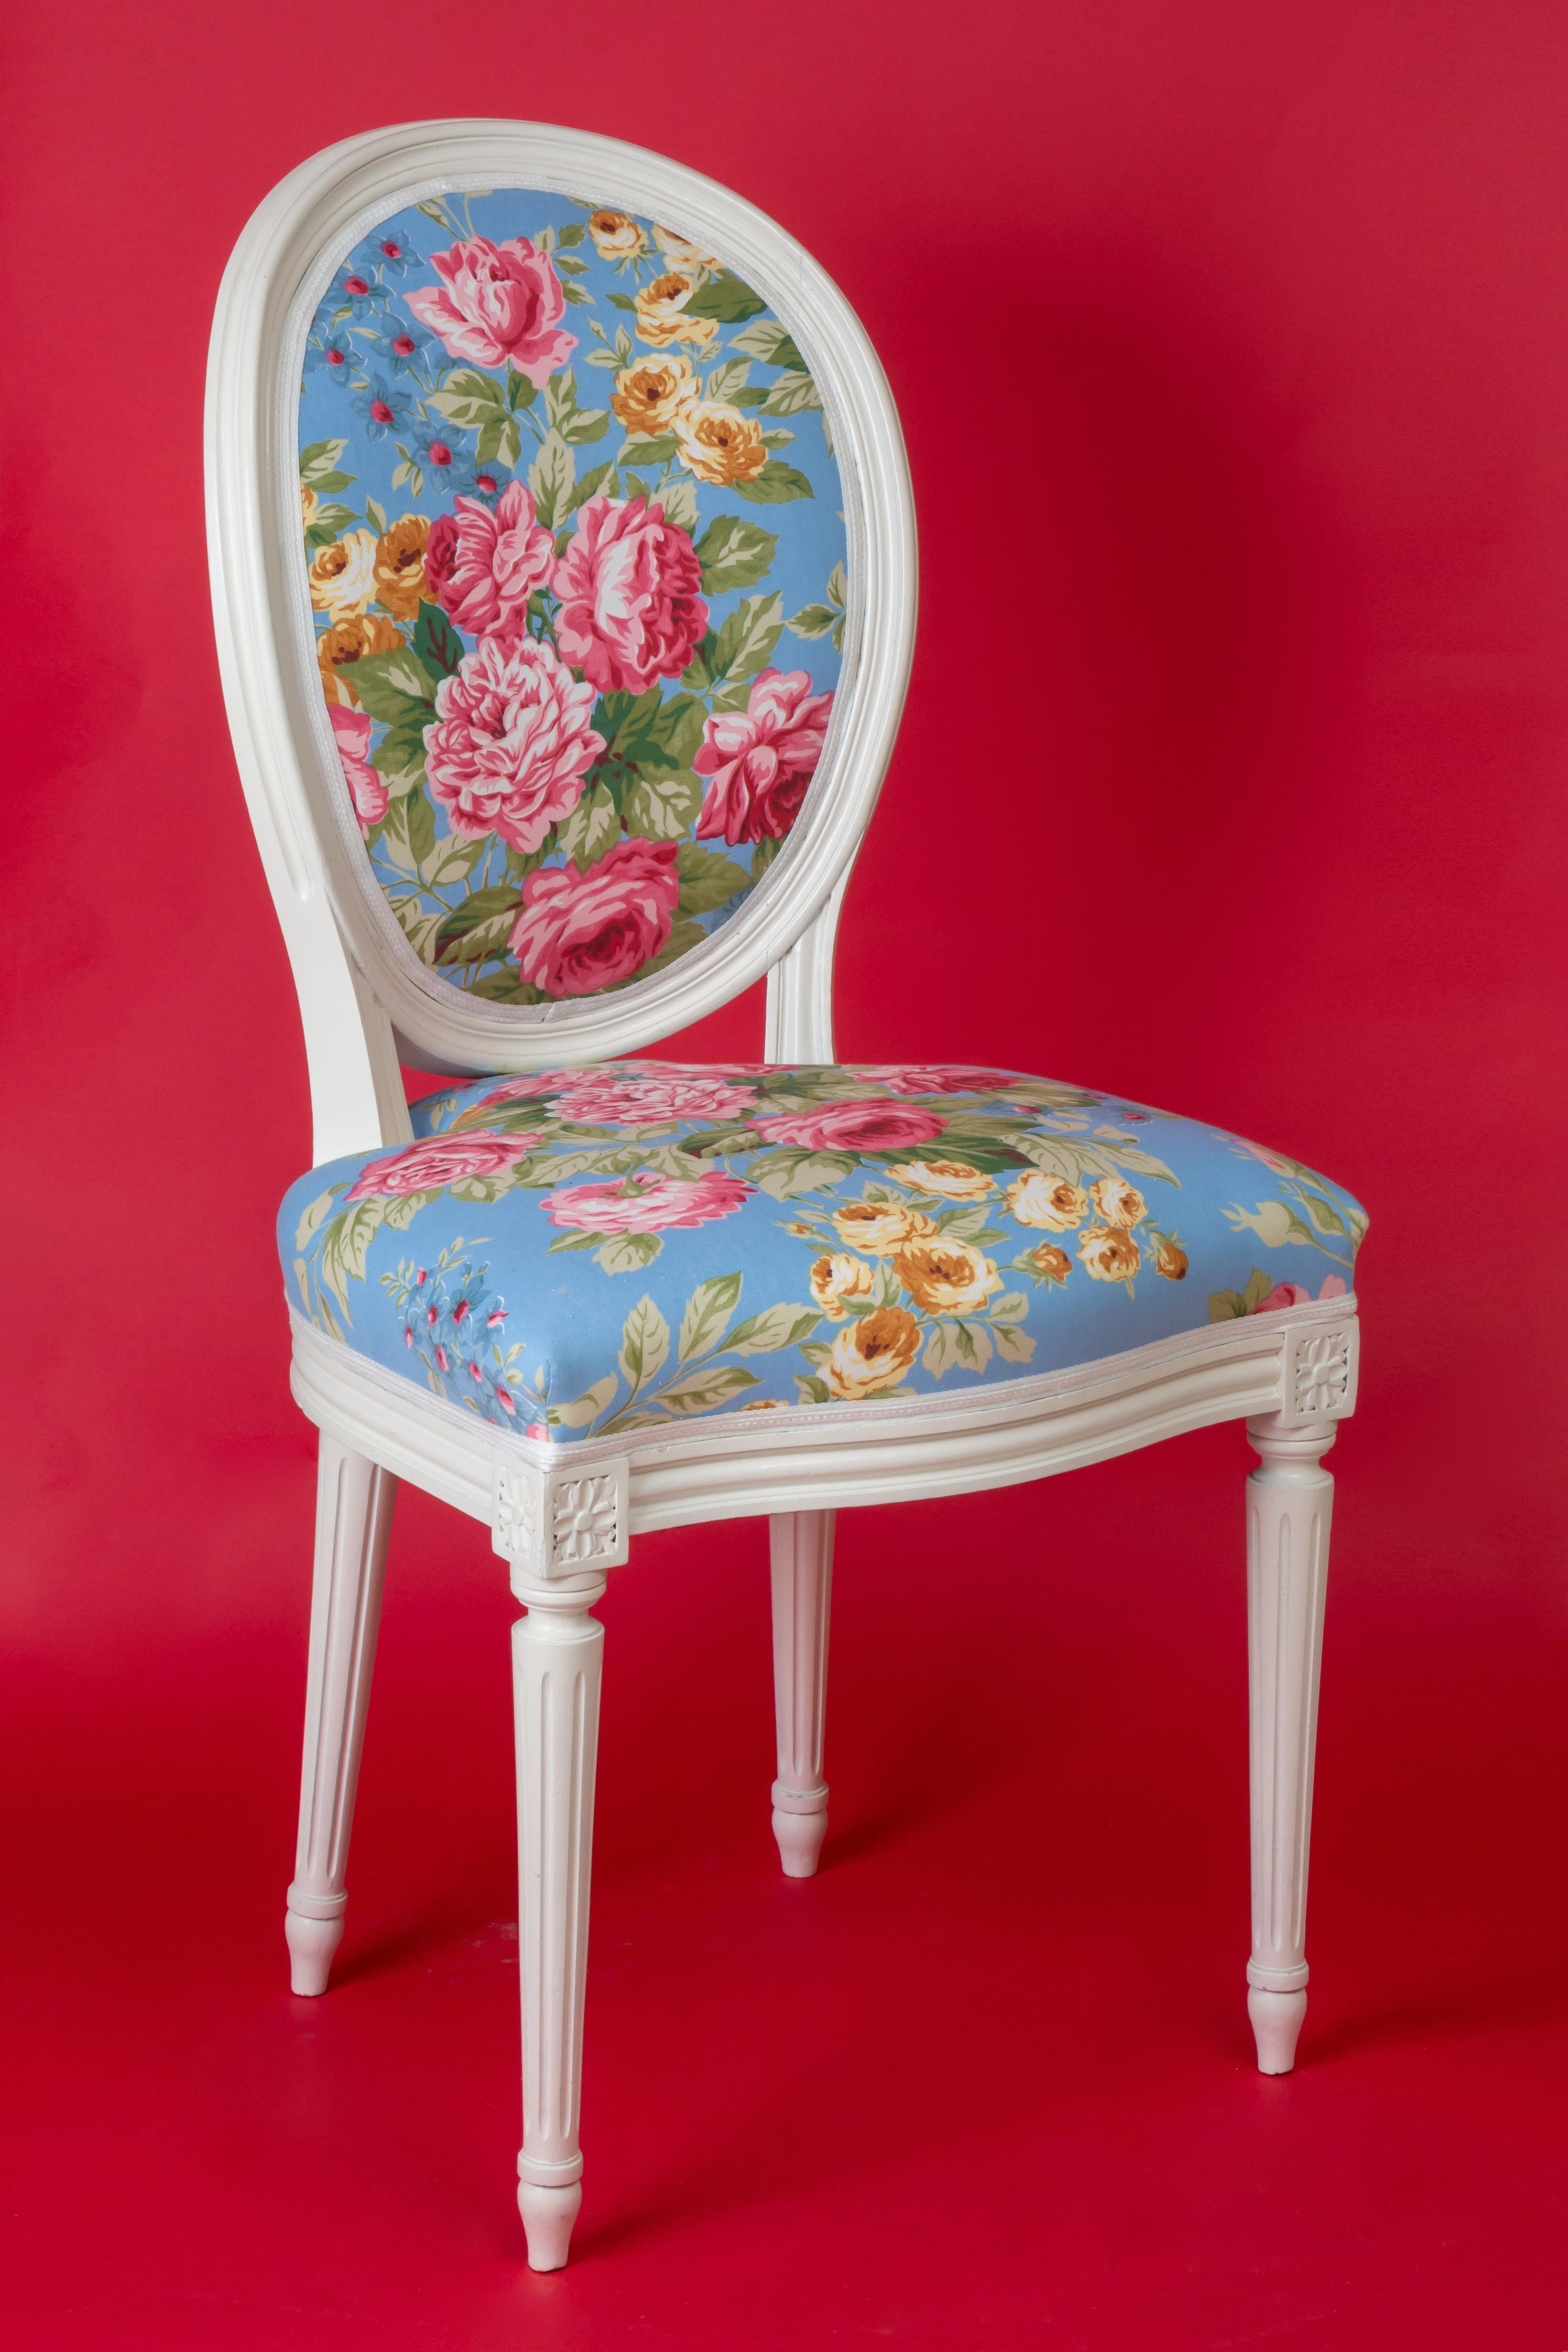 19th Century Pair of Louis XVI Style Medallion Chairs, with Peony Flowers Pattern For Sale